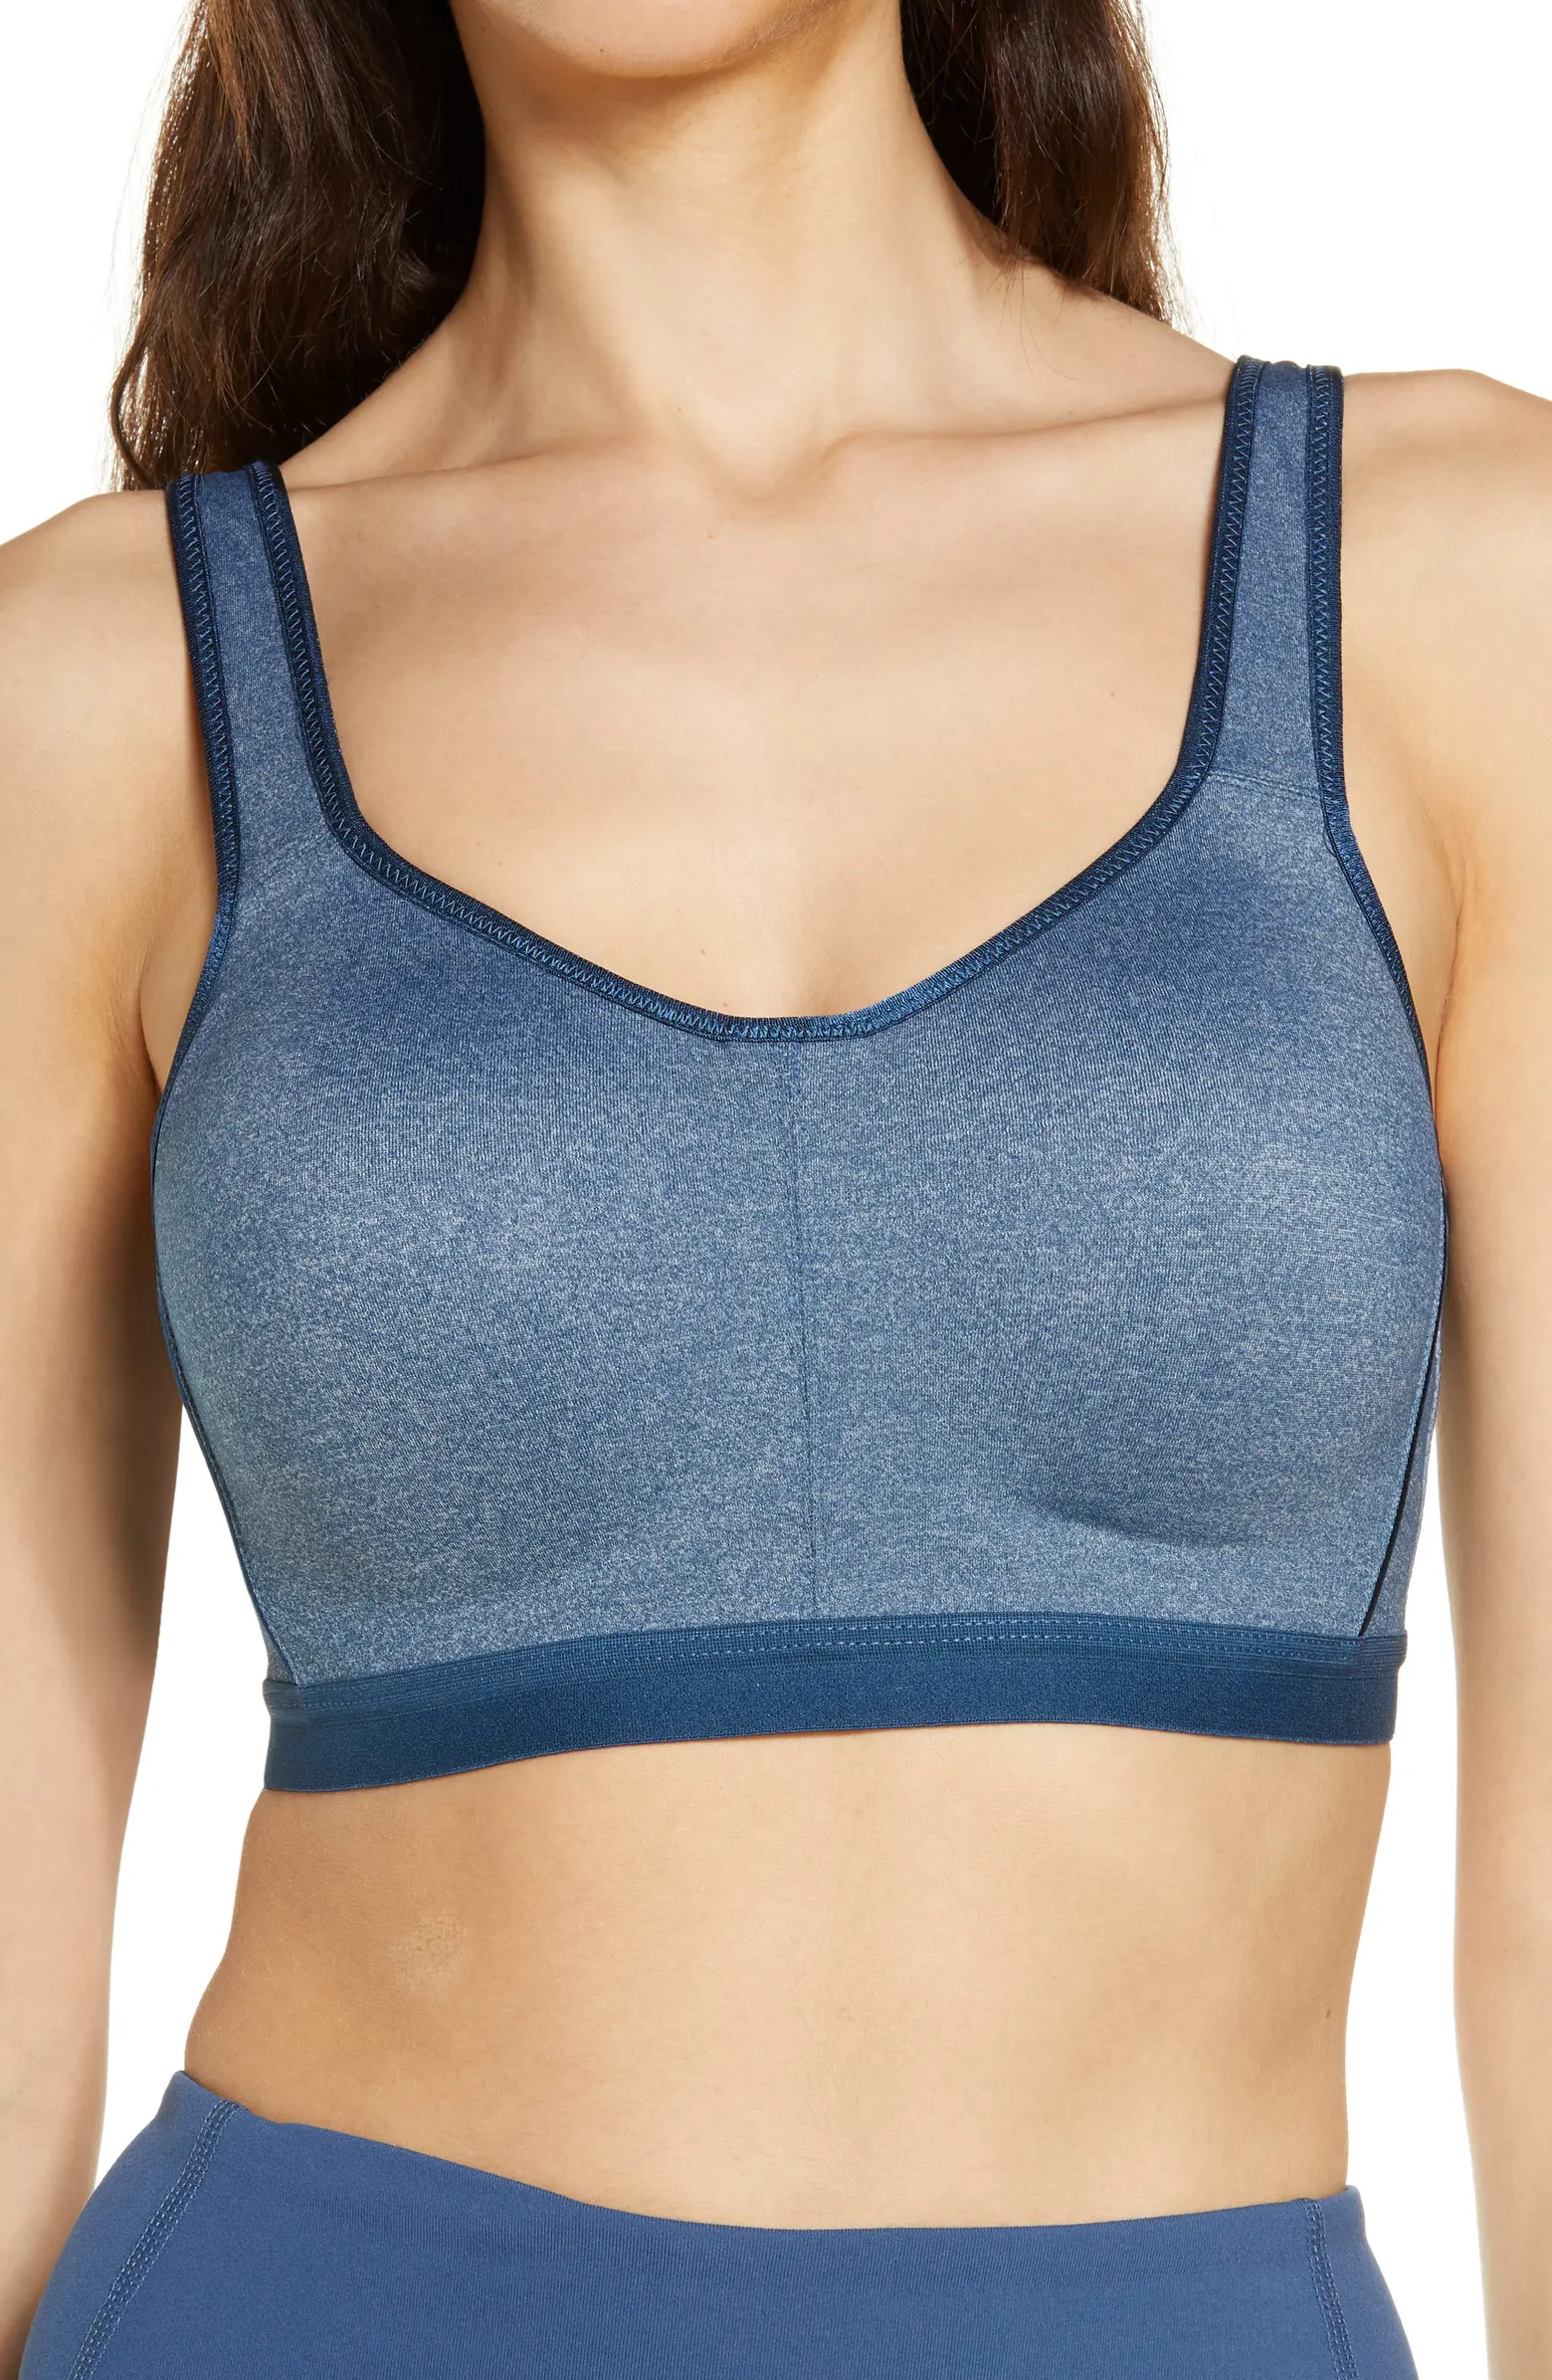 7 Sports Bras We're Loving Right Now - Oxygen Mag